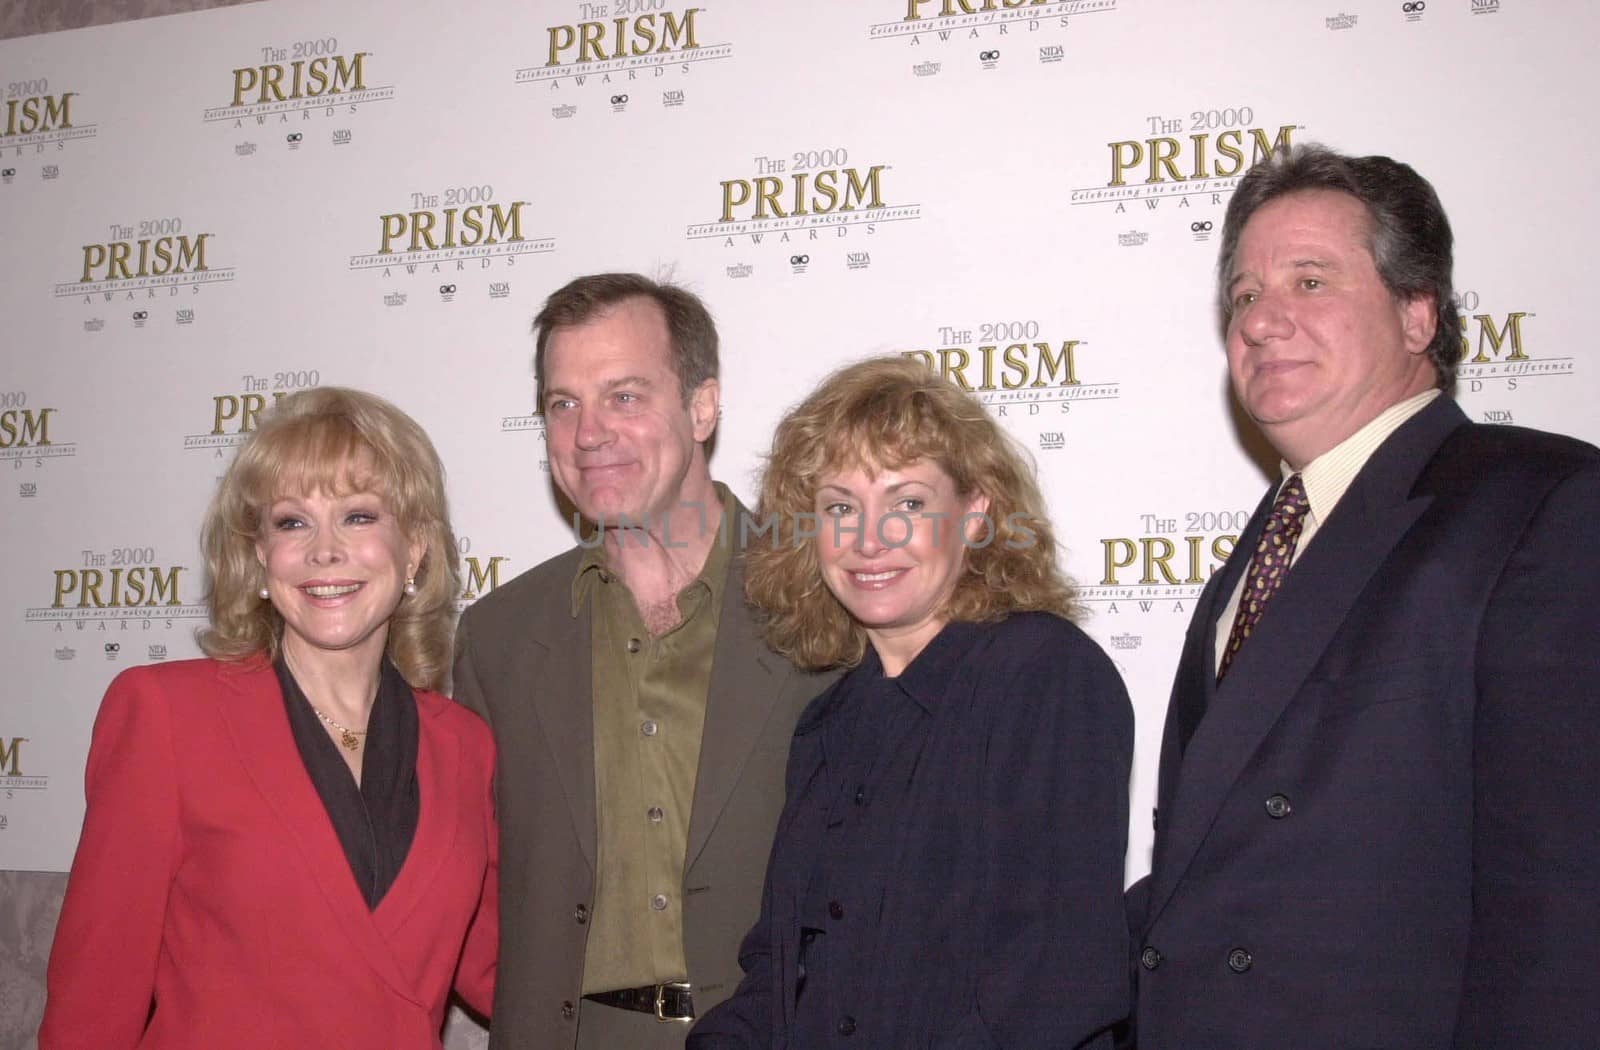 Barbara Eden, Stephen Collins, Catherine Hicks and Brian Dyak at the nominations announcement for the 2000 Prism Awards, 02-08-00